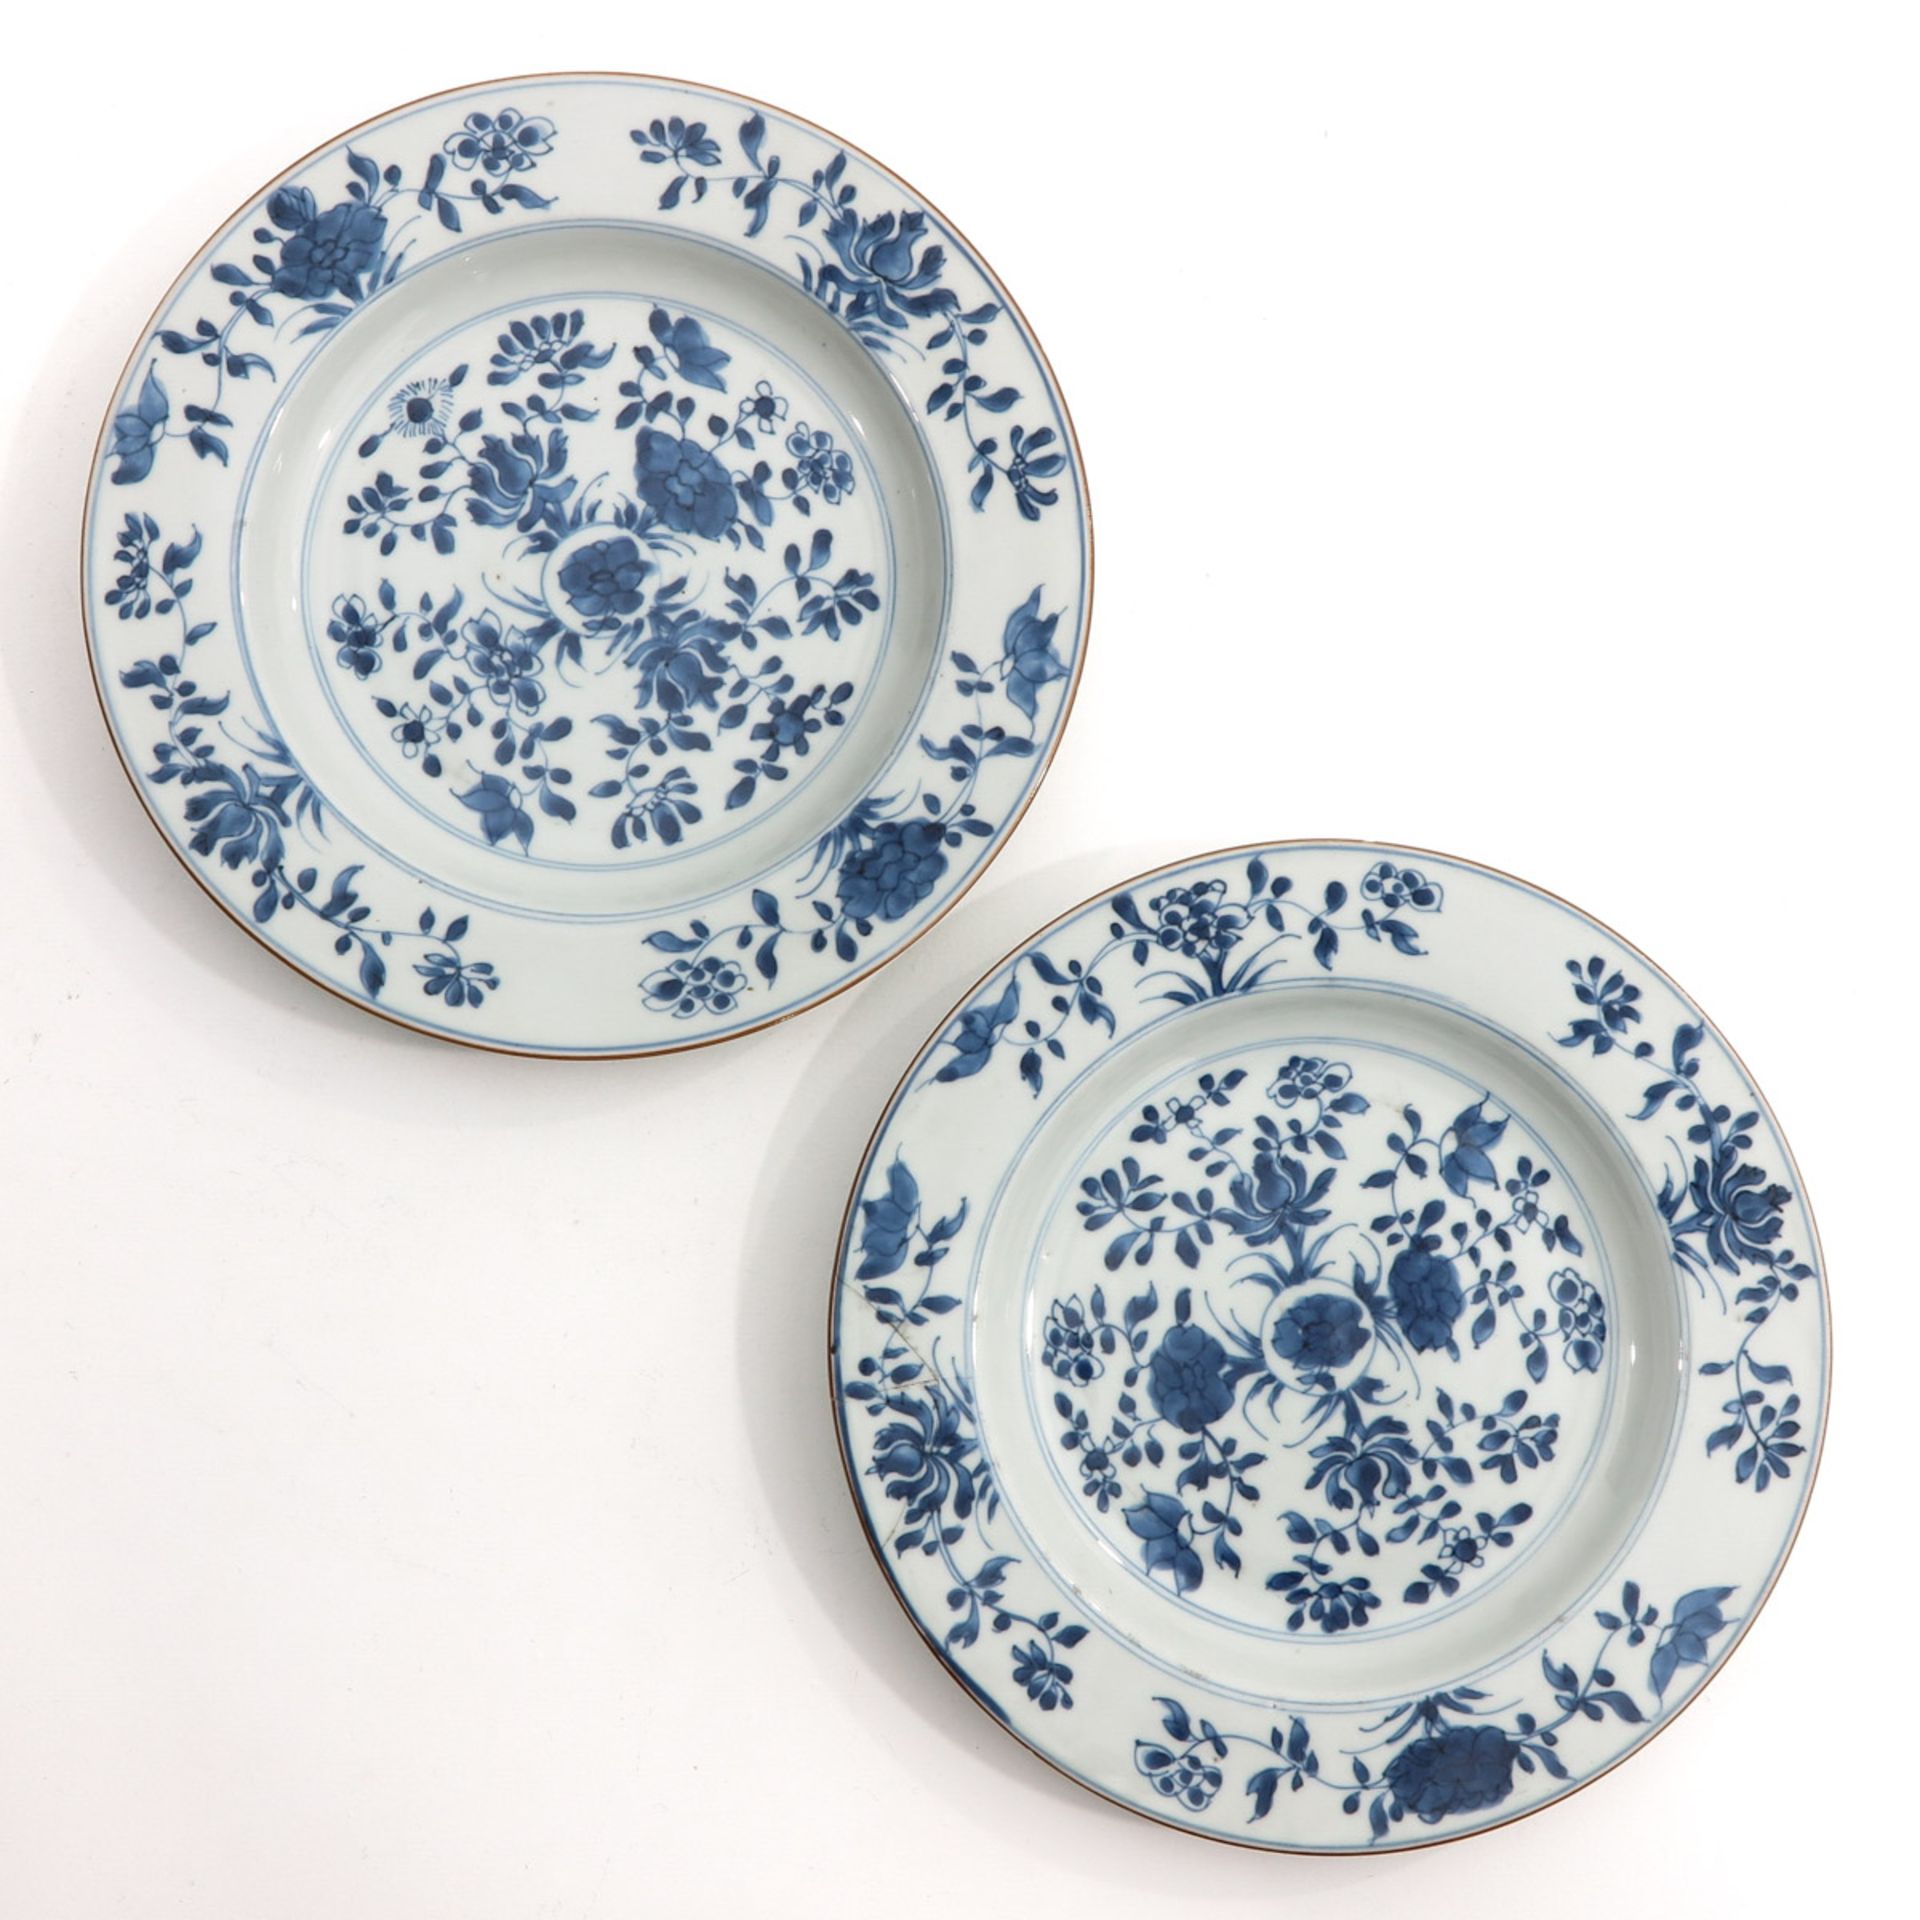 A Series of 5 Blue and White Plates - Image 5 of 9